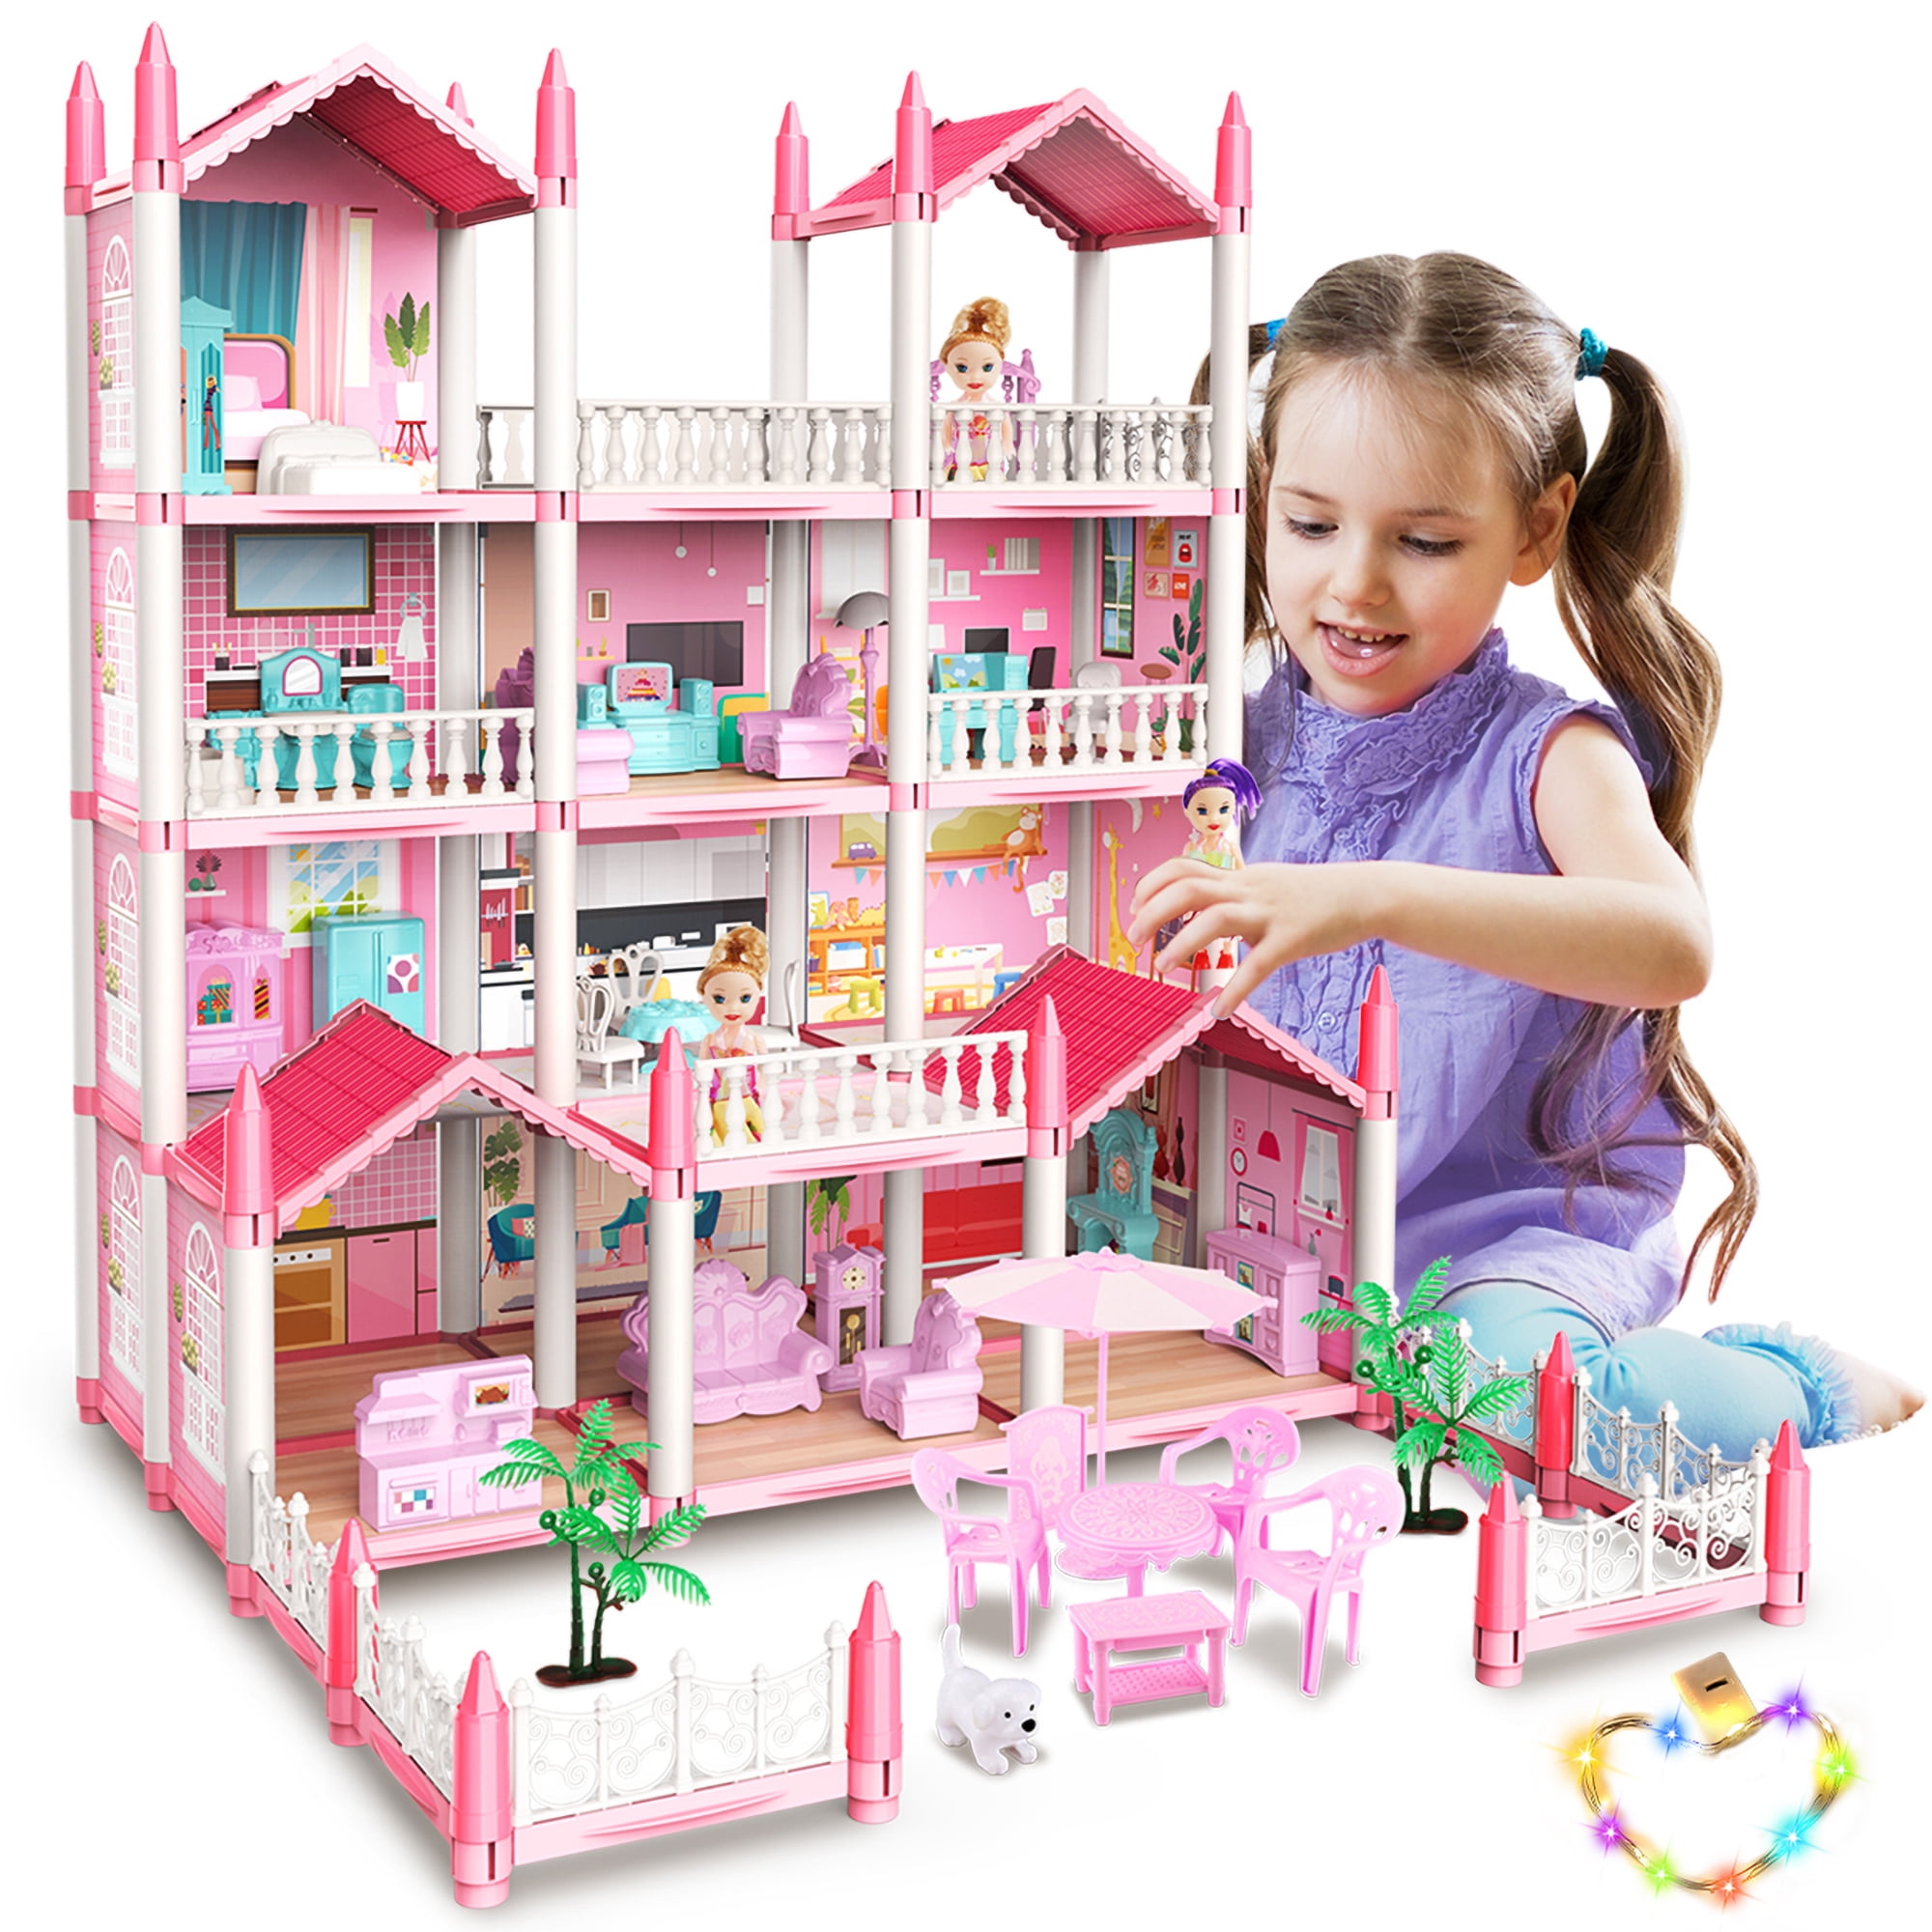 Doll House, Dream Doll House Furniture Pink Girl Toys, 4 Stories 10 Rooms  Dollhouse with 2 Princesses Slide Accessories, Toddler Playhouse Gift for